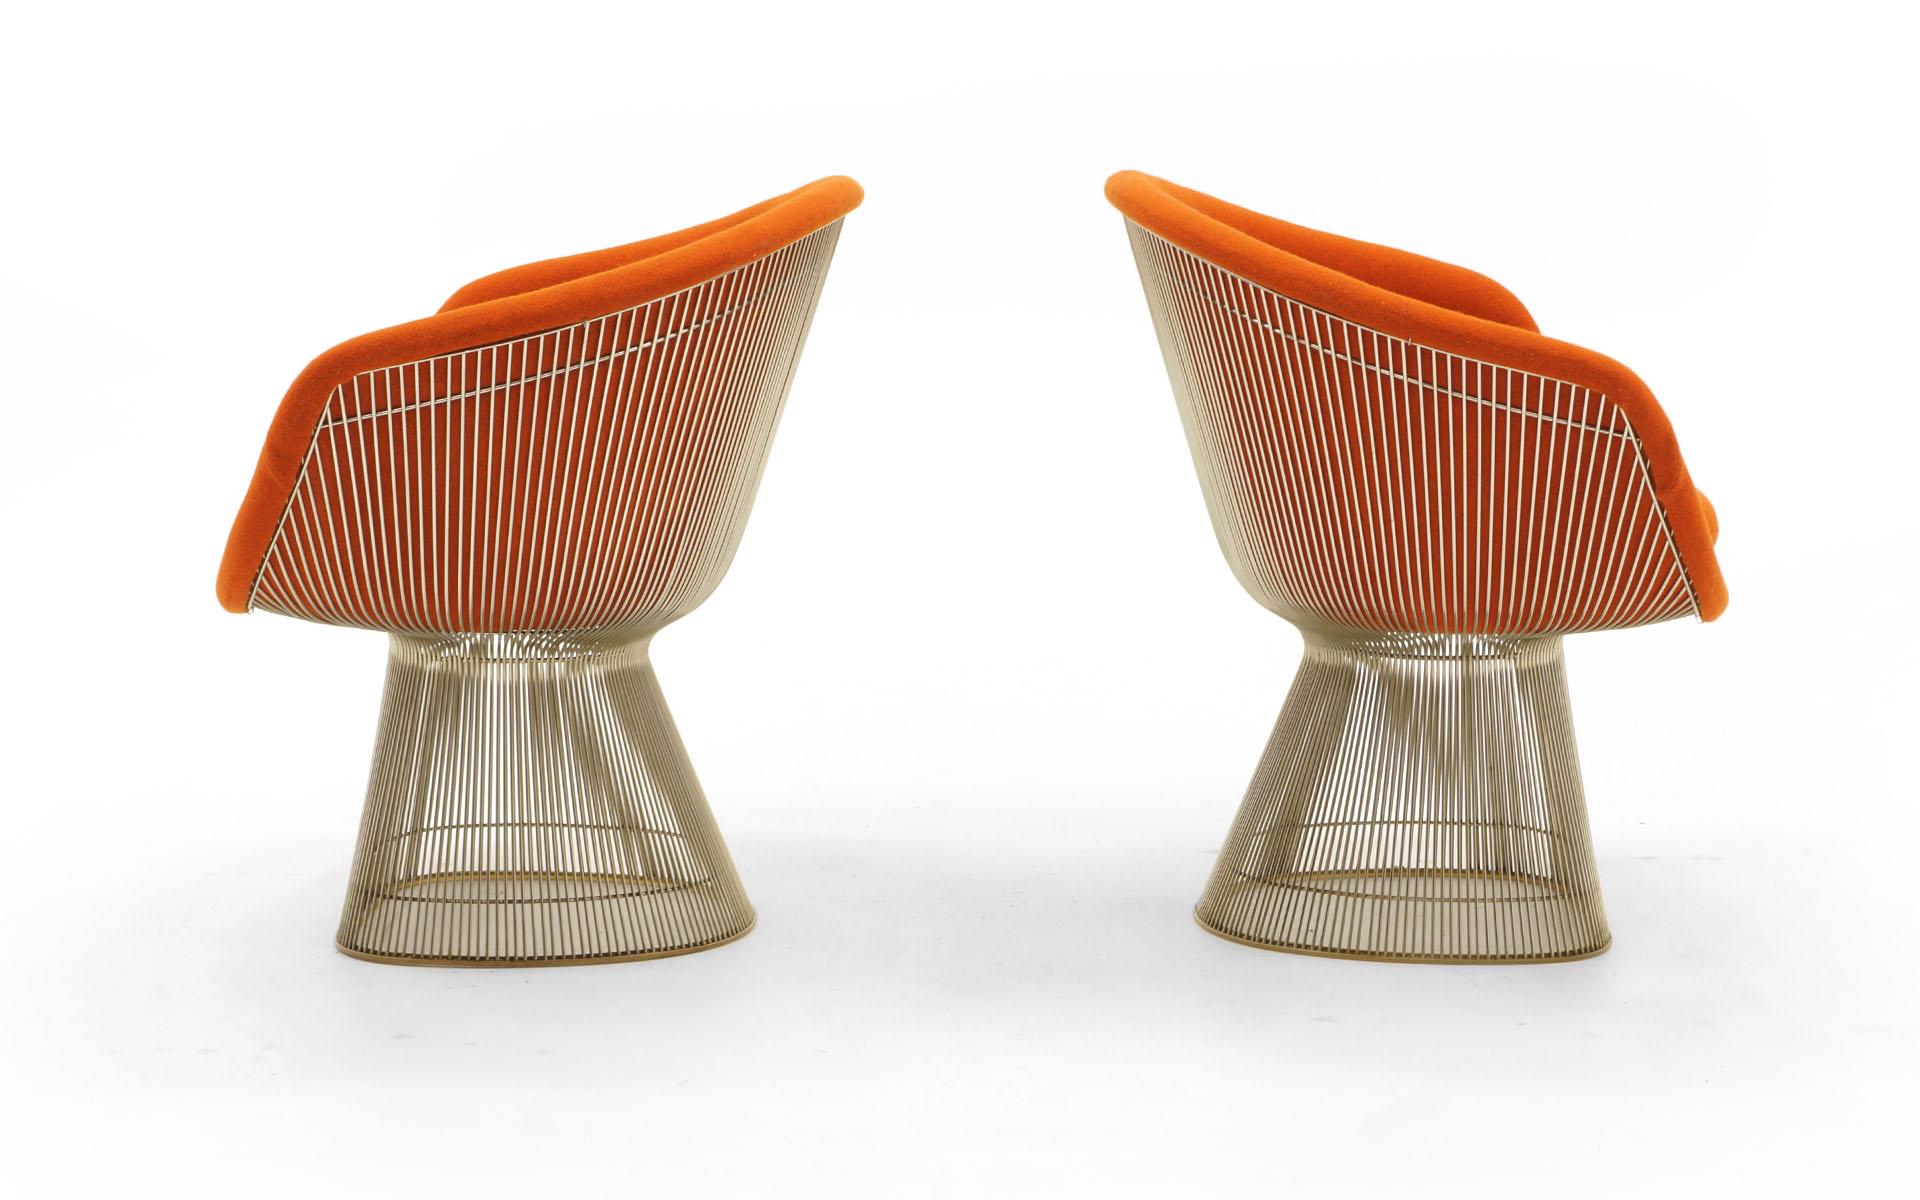 American Warren Platner Lounge Chairs for Knoll, Wire Frames, Orange Maharam Fabric, Pair